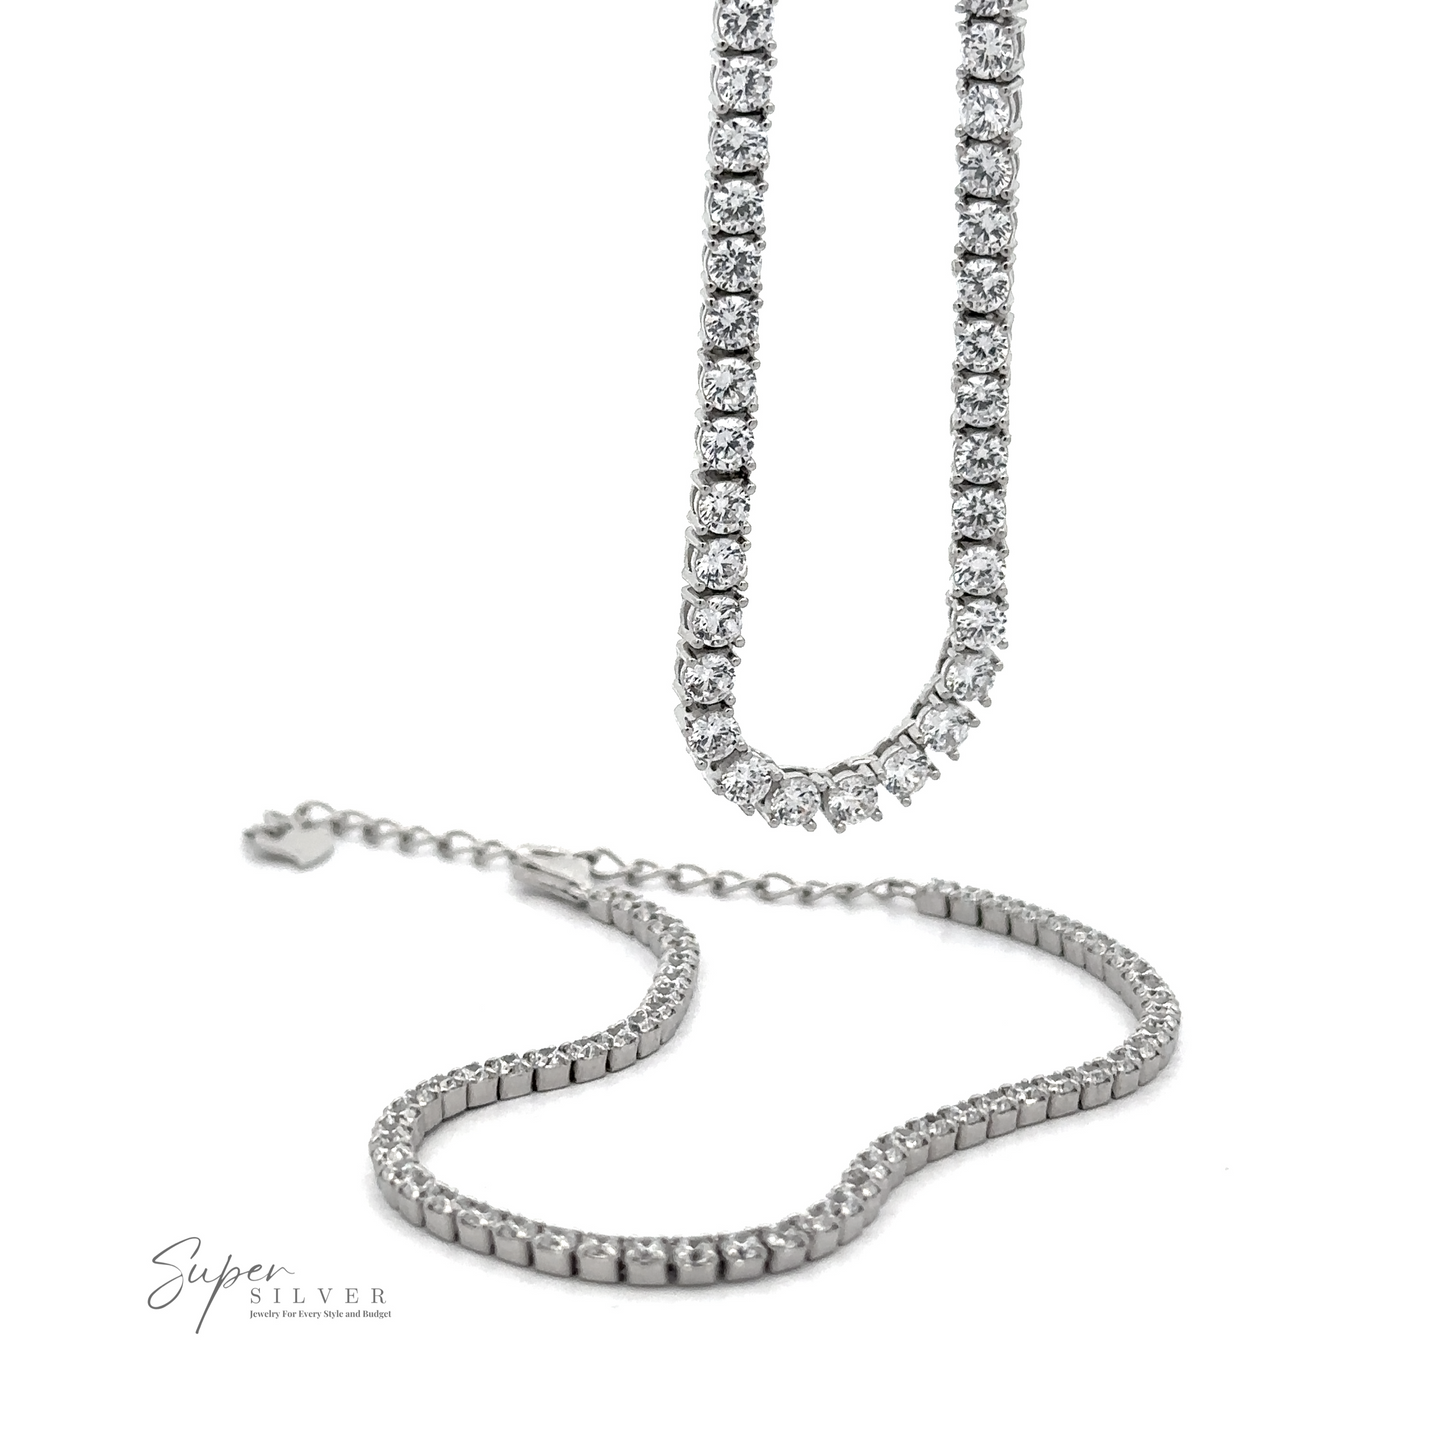 
                  
                    Two Cubic Zirconia Tennis Necklaces adorned with small, round diamonds; one is extended vertically, while the other lies horizontally on a white surface. Made from 925 Sterling Silver and featuring the "Super Silver" logo in the bottom left.
                  
                